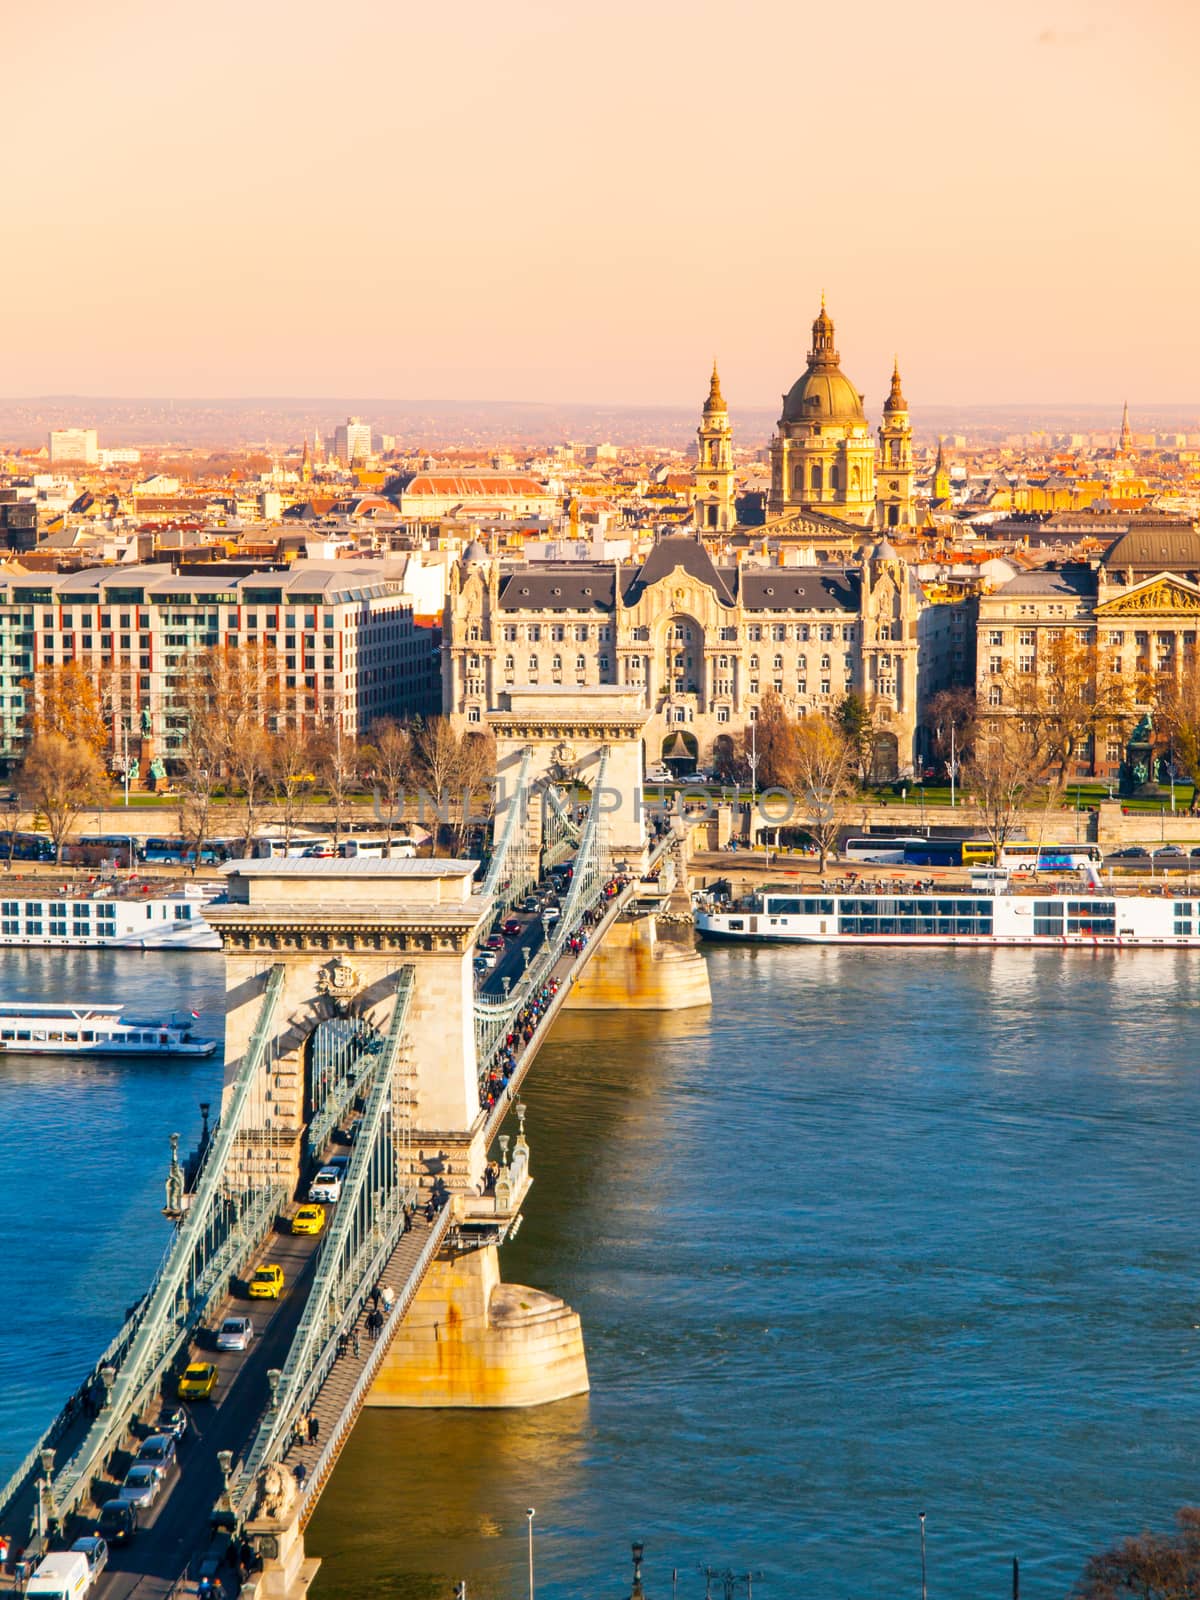 Famous Chain Bridge over Danube River and Saint Stephen's Basilica view from Buda Castle on sunny autumn day in Budapest, capital city of Hungary, Europe. UNESCO World Heritage Site